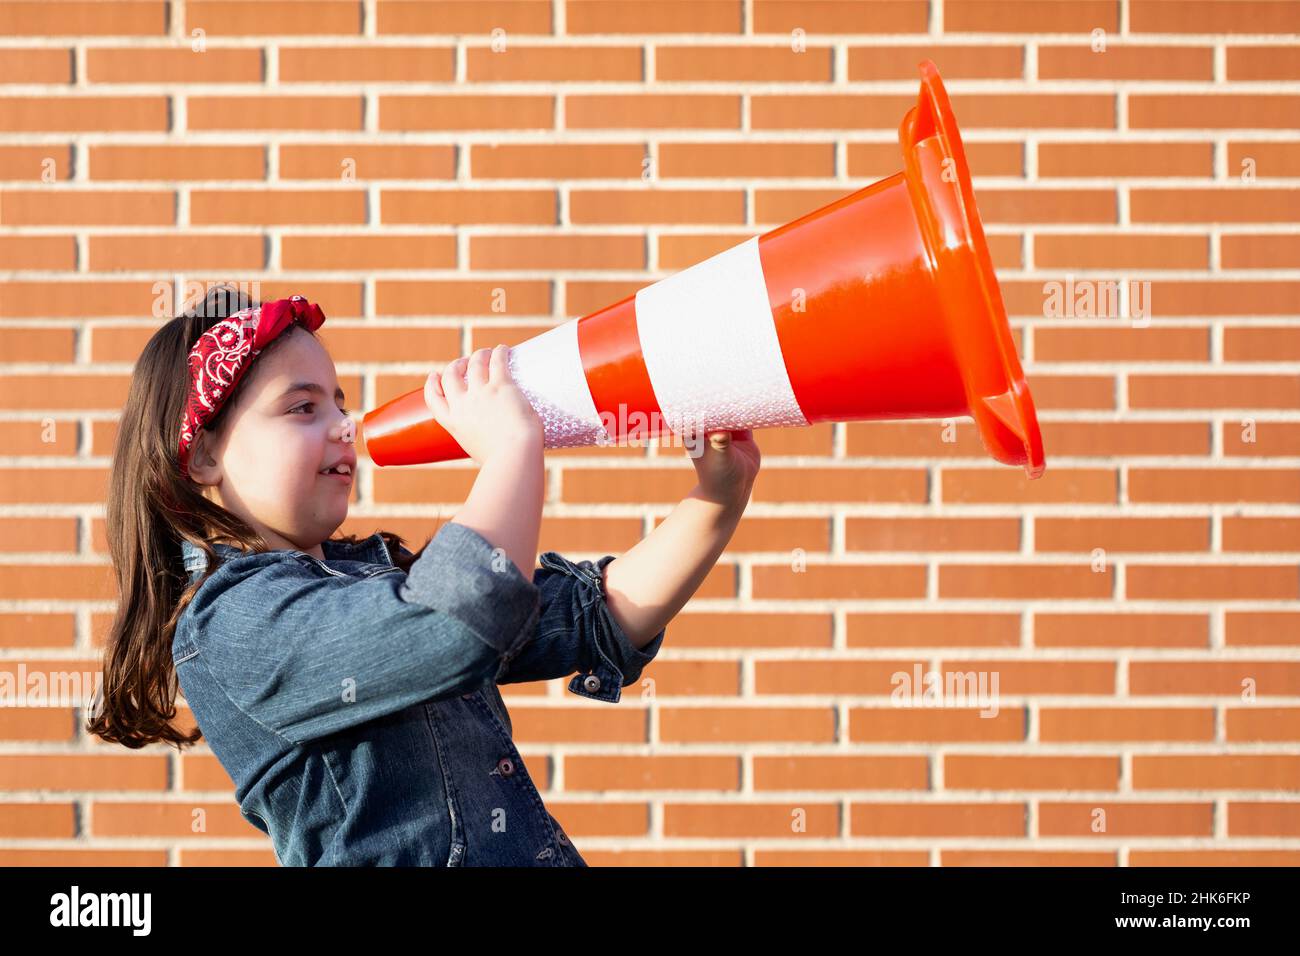 Child activist isolated on brick wall shouting through megaphone. Concept of equality and defense of women's rights. Stock Photo